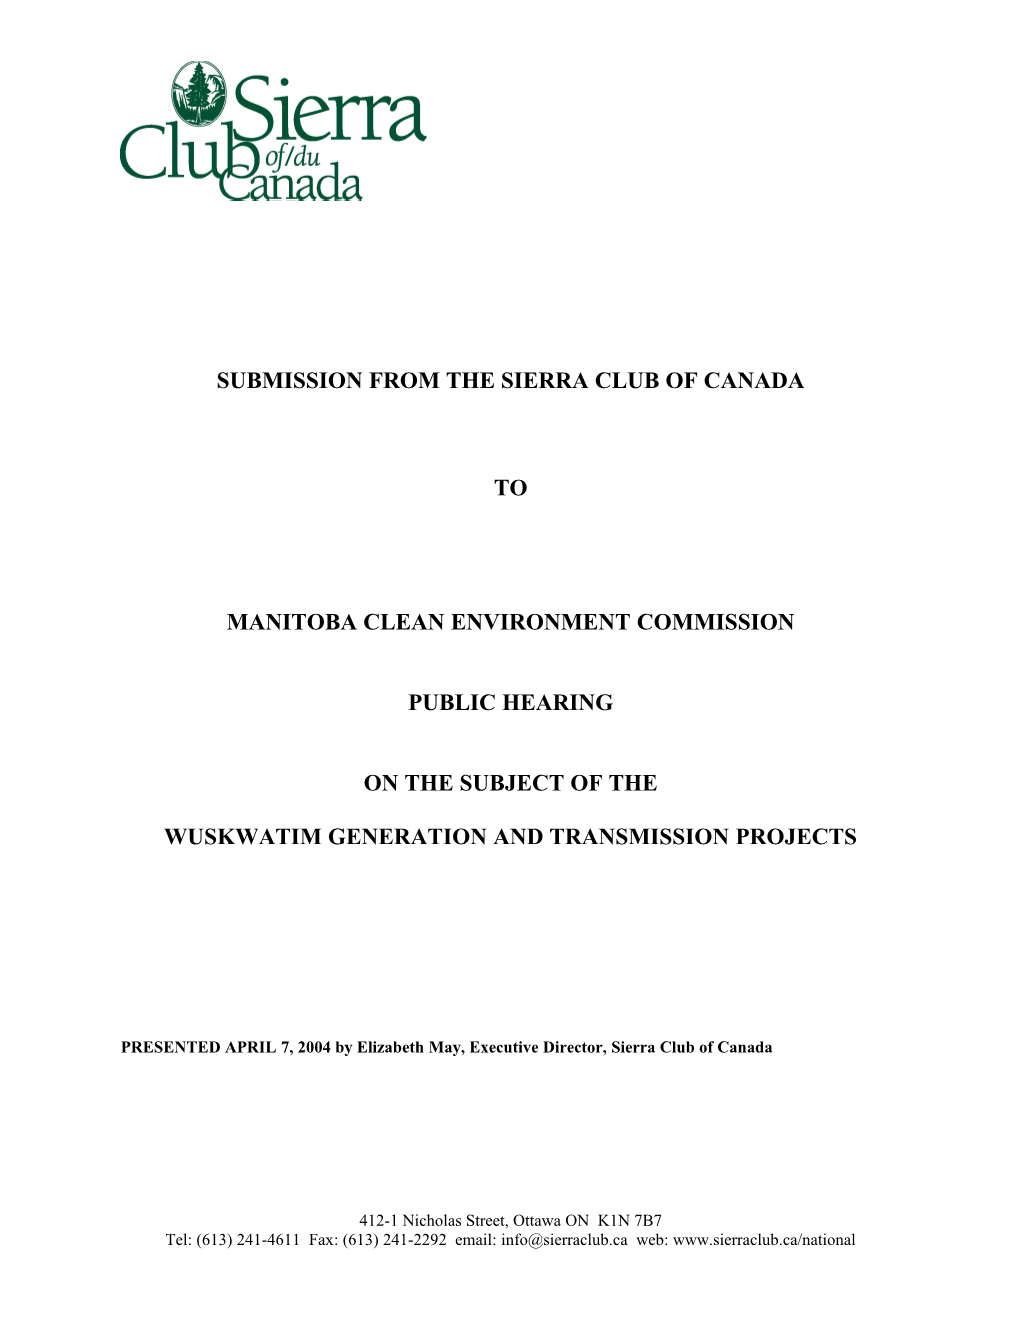 Submission from the Sierra Club of Canada